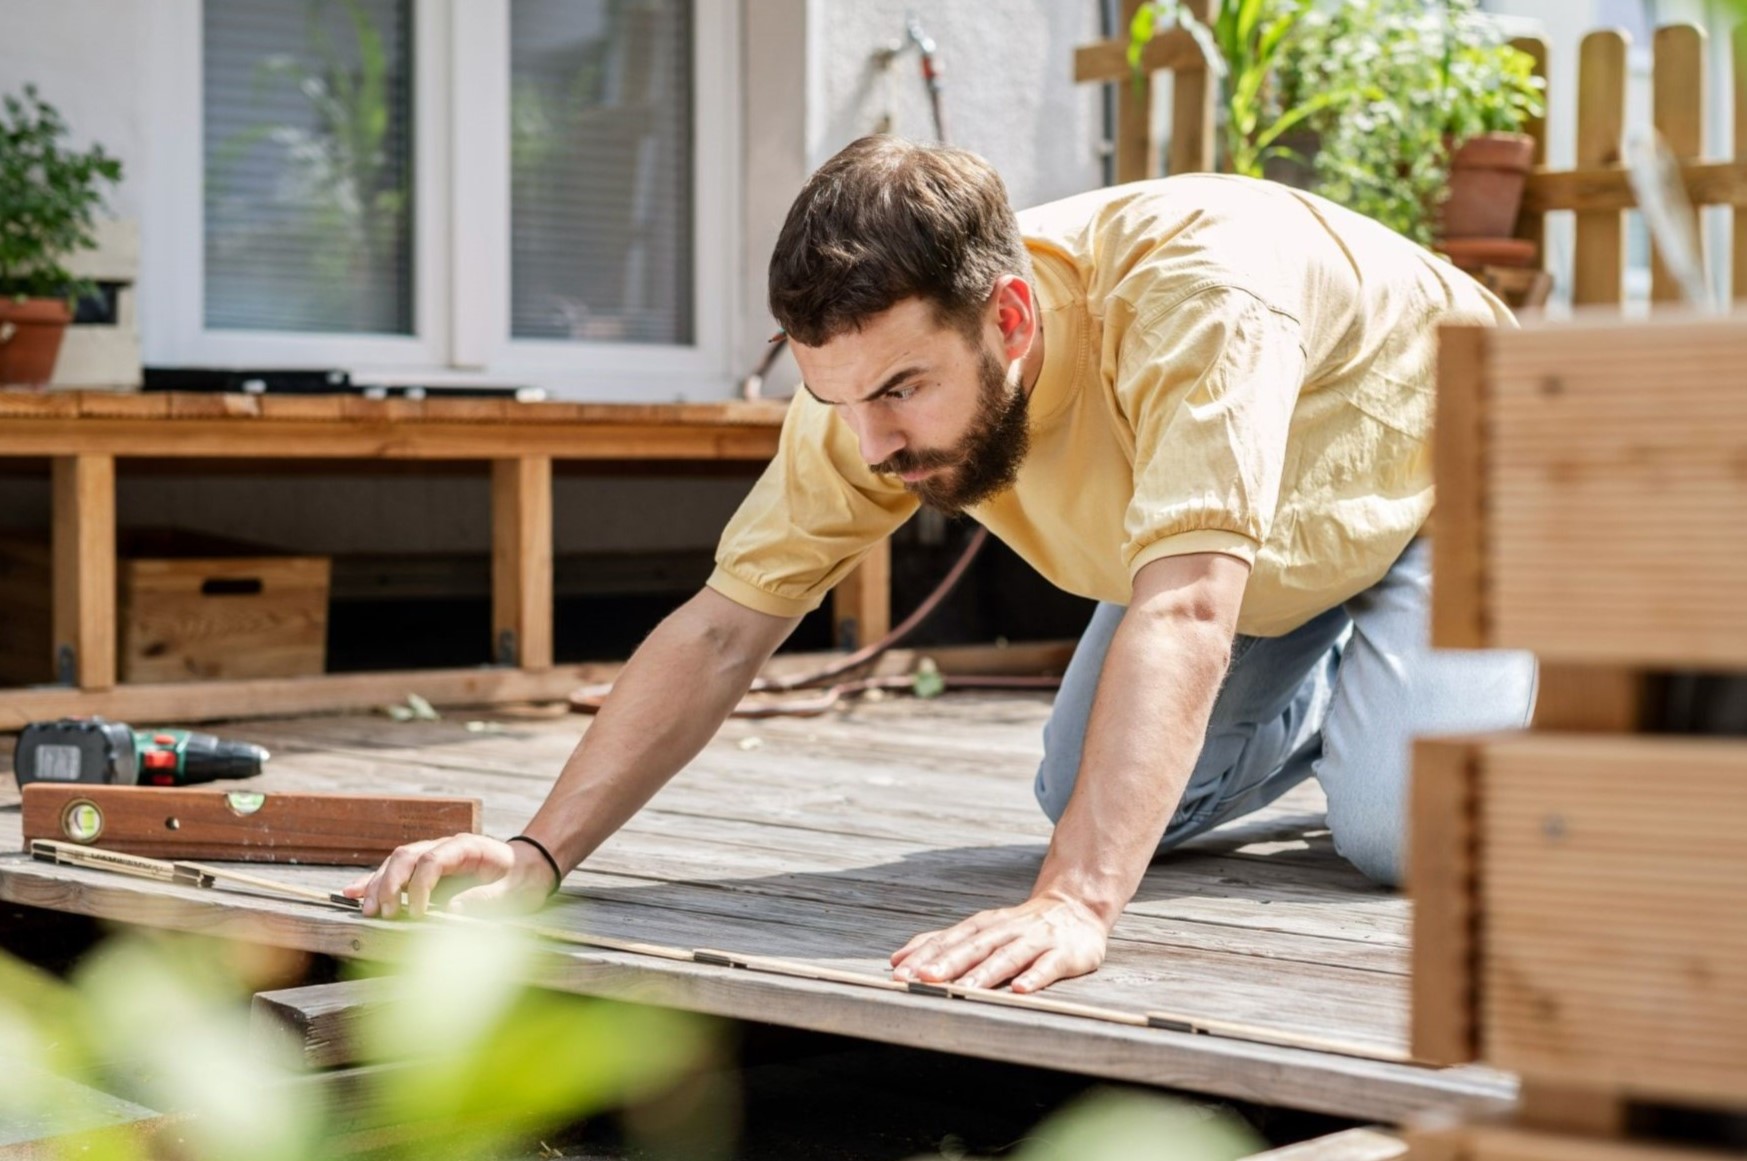 What Requires Specialized Home Inspection